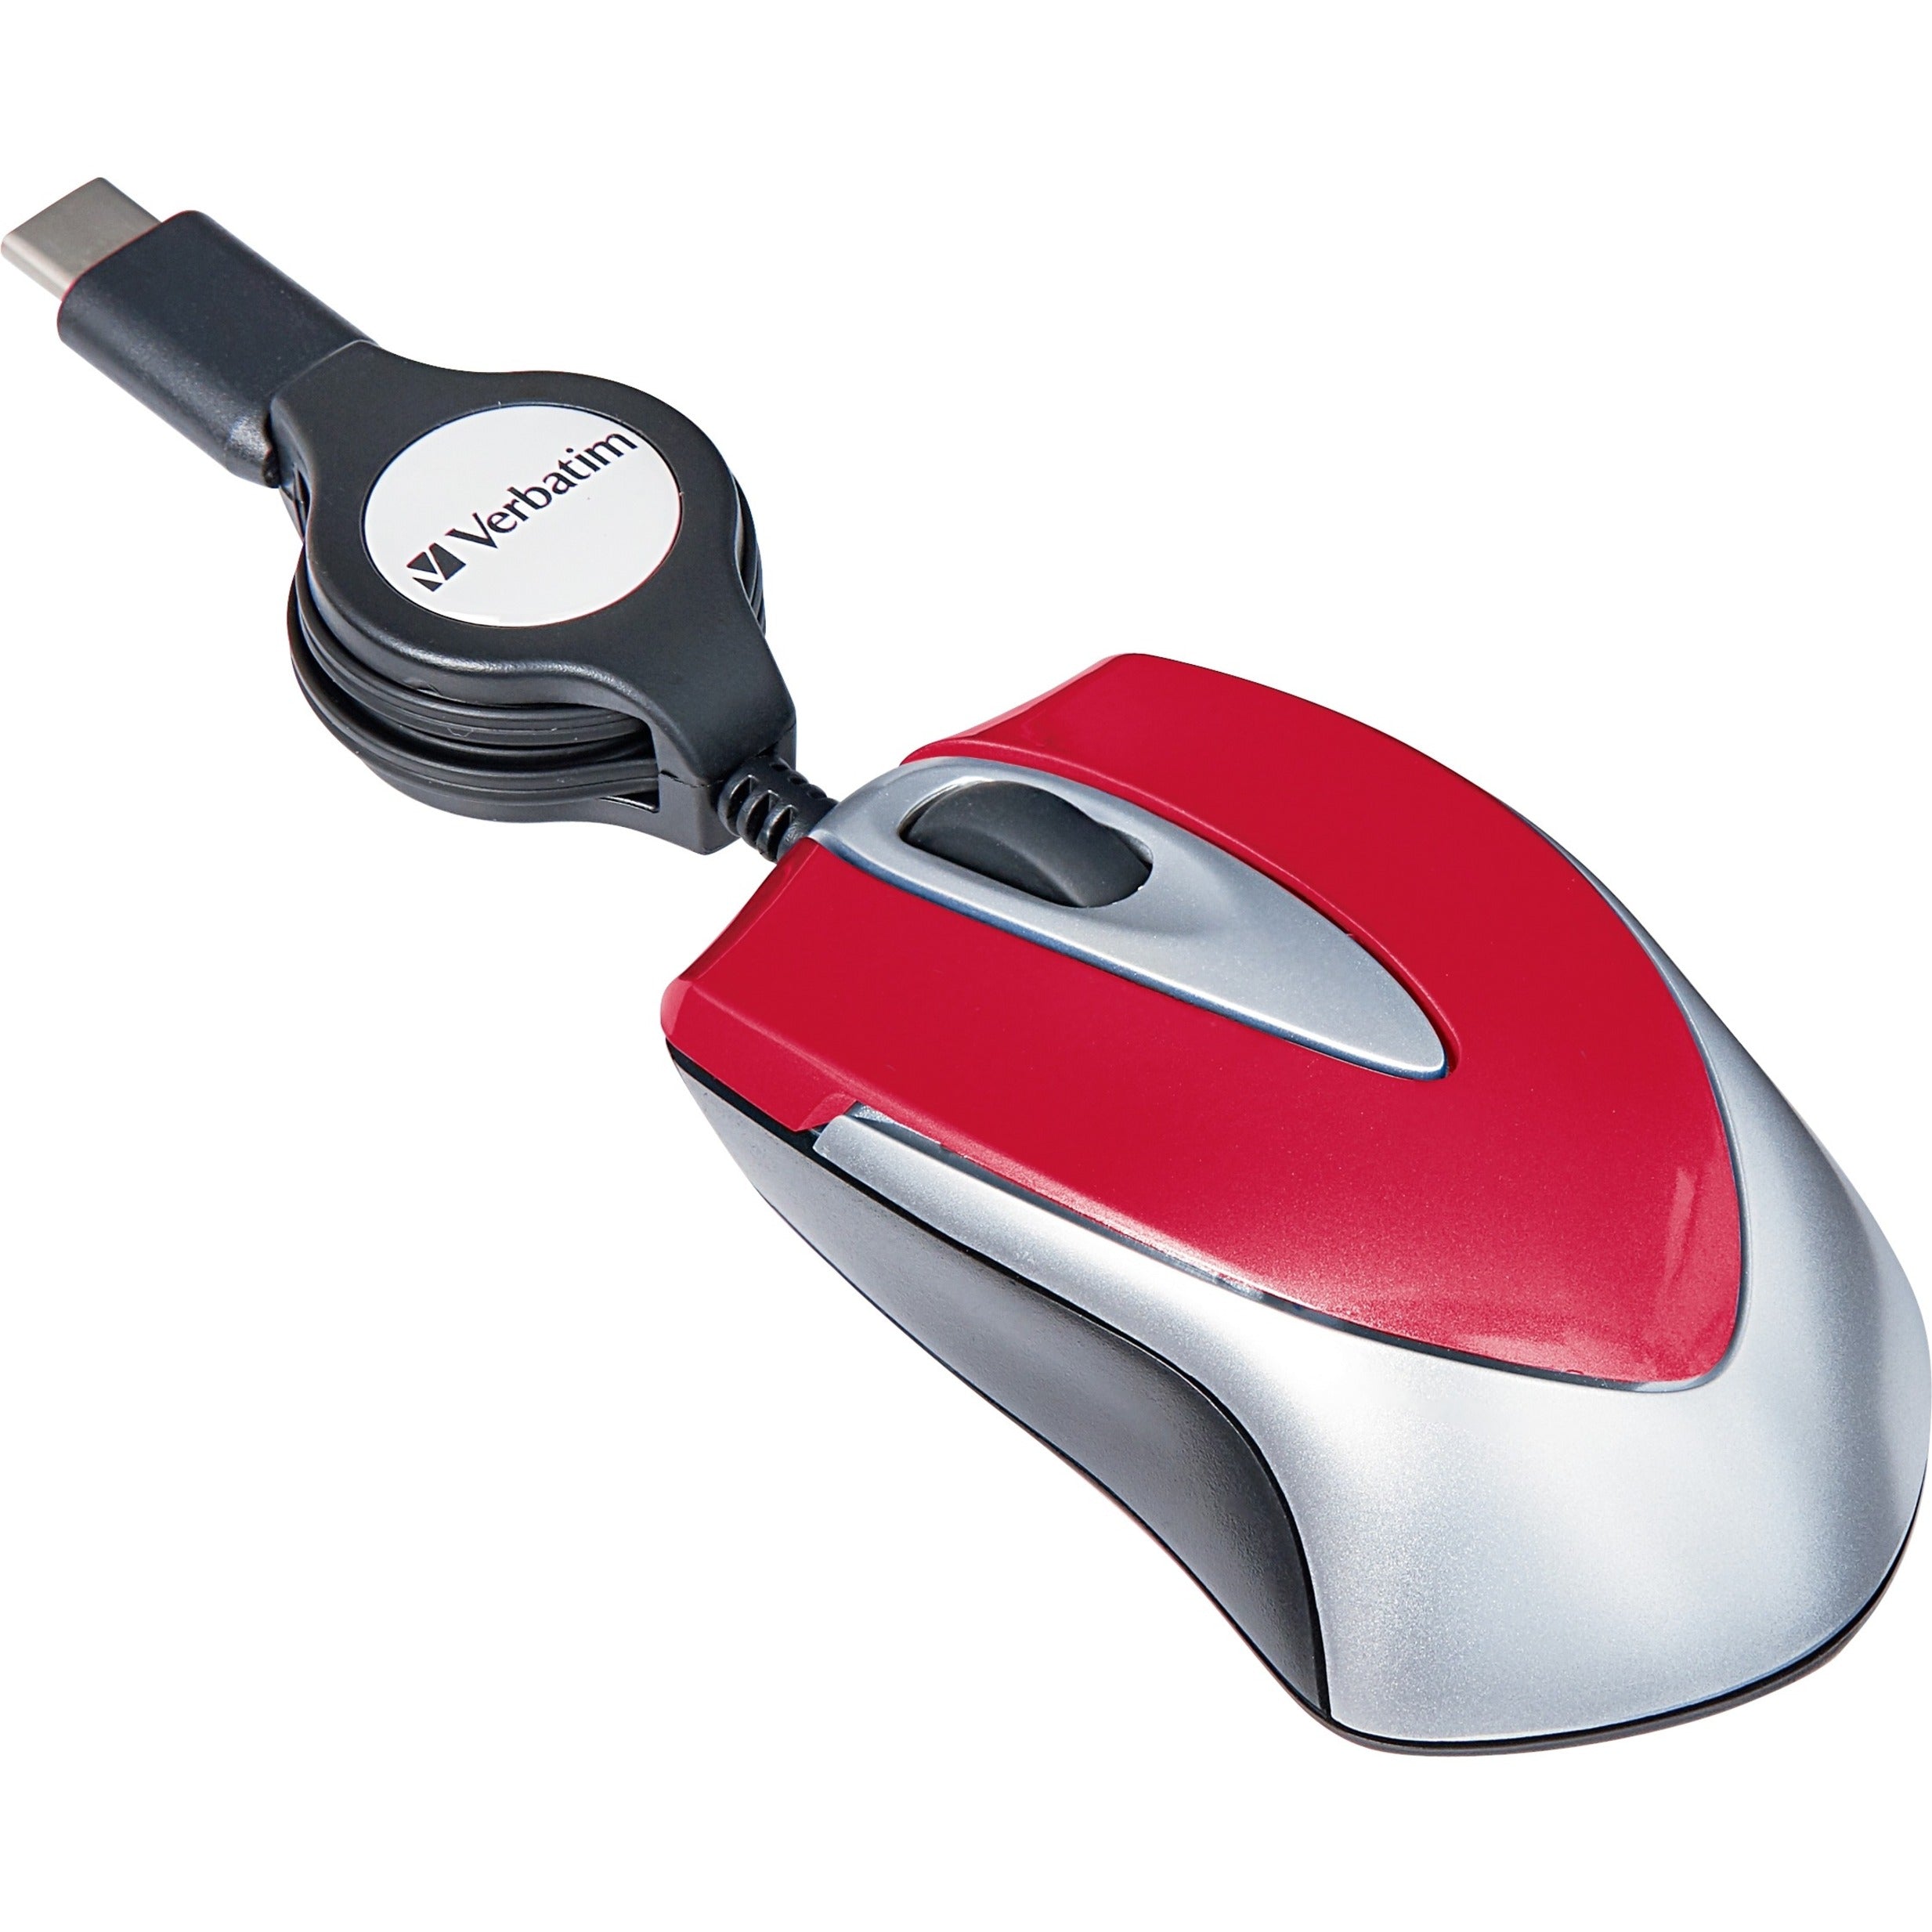 Verbatim 70236 USB-C Mini Optical Travel Mouse-Red, 3 Buttons, Cable Connectivity